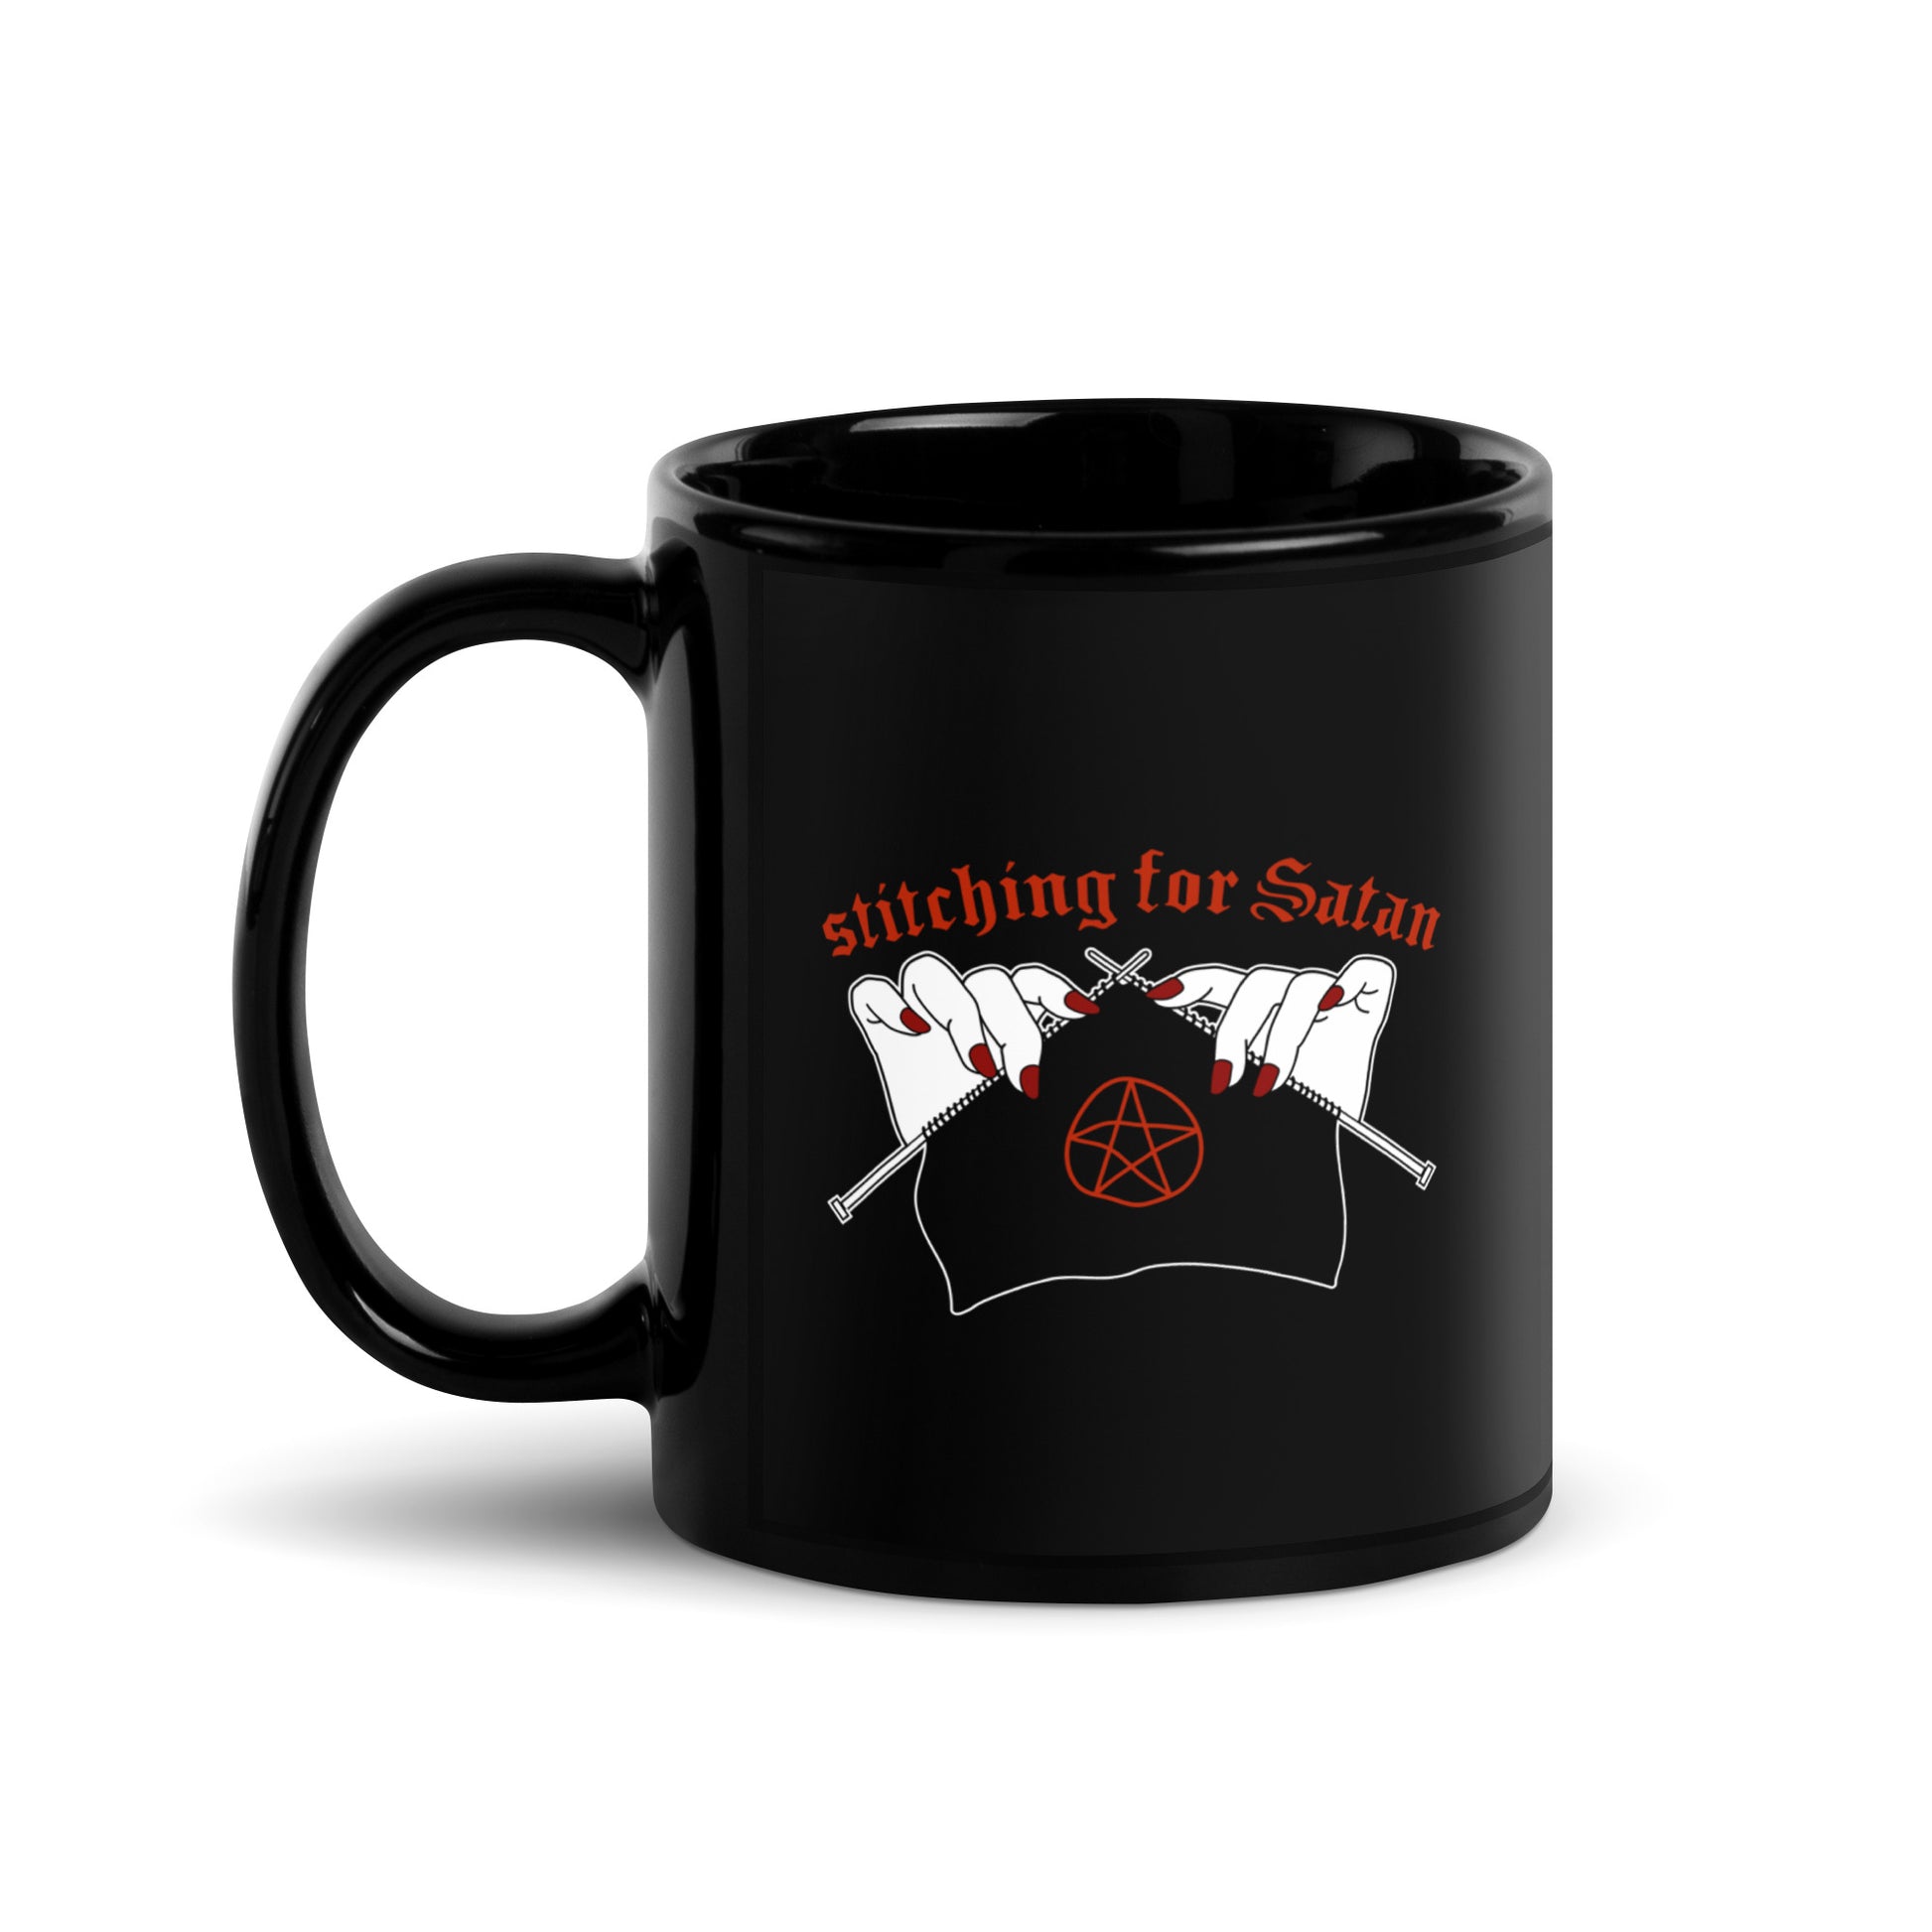 A black ceramic coffee mug featuring an illustration of pale white hands with red fingernails holding knitting needles. Fabric on the needles features a red pentagram. Text above the hands reads "stitching for Satan" in a gothc red font.